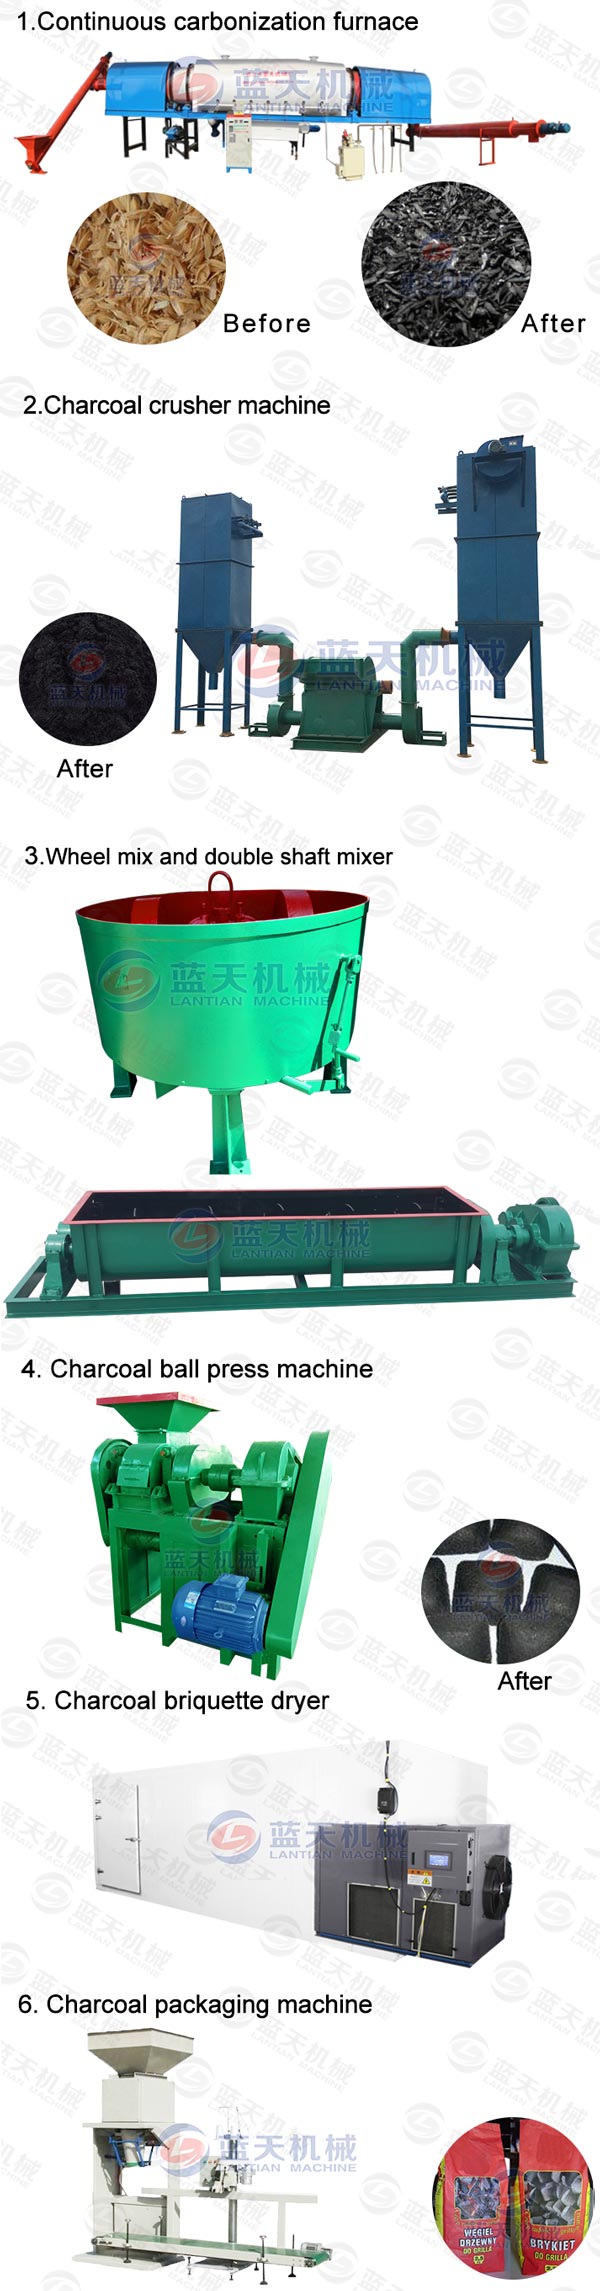 Product line of charcoal ball briquette machine